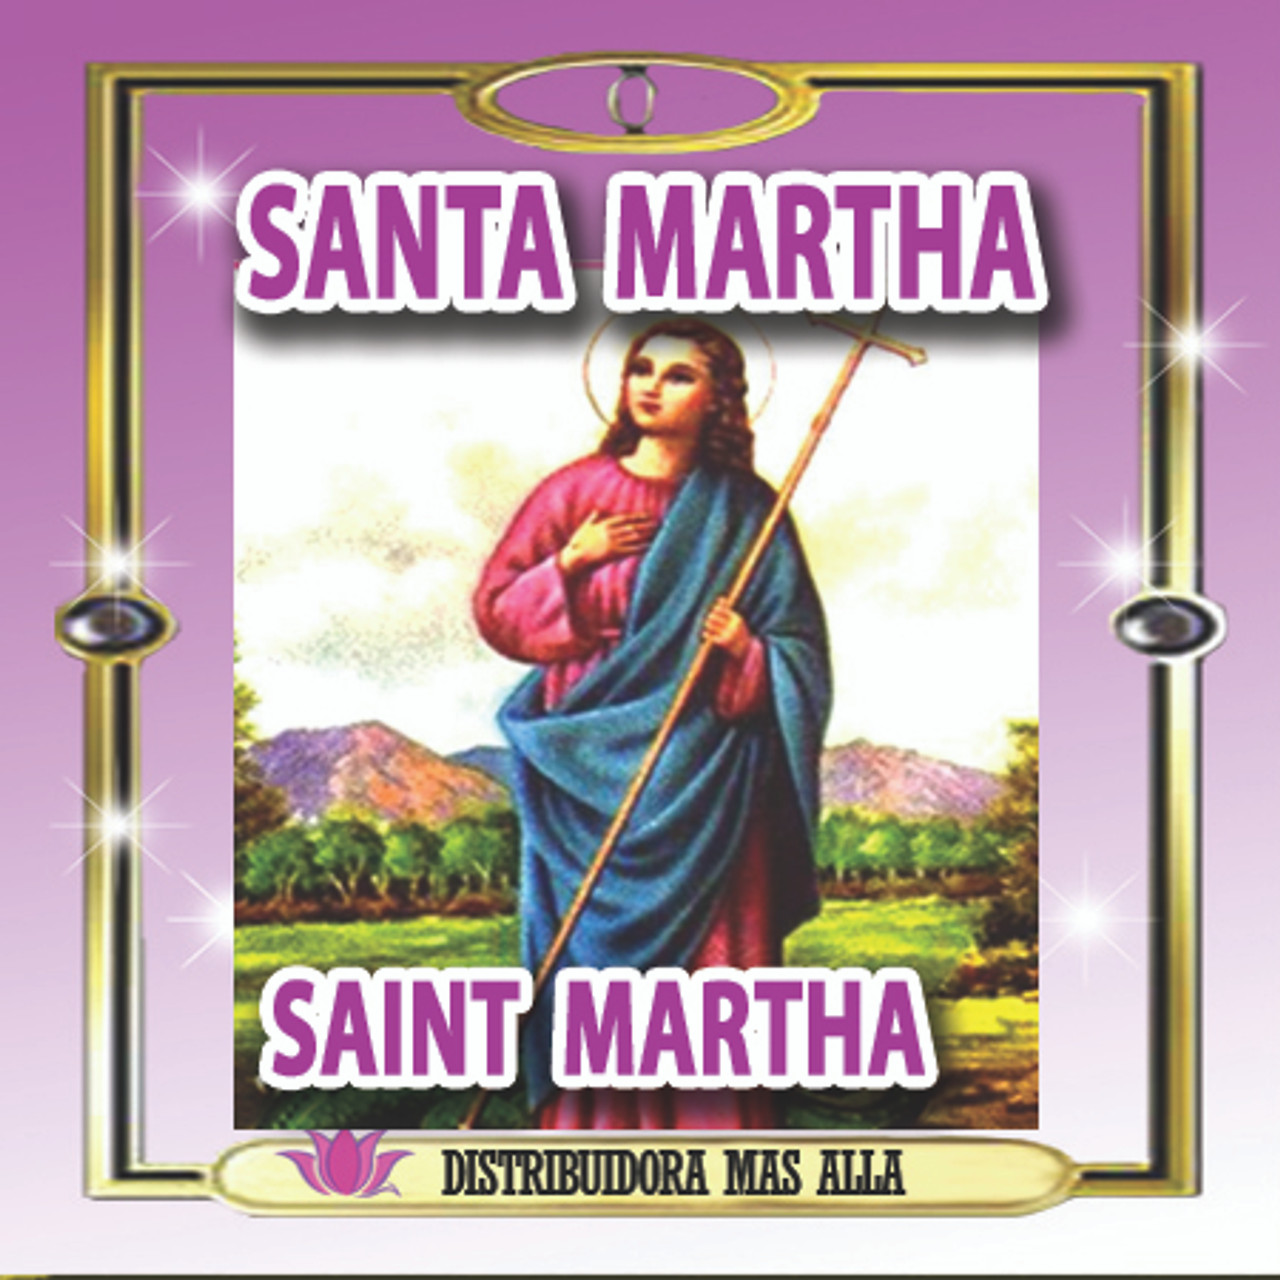 Aceite Santa Martha - Anointing And Rituals Oil